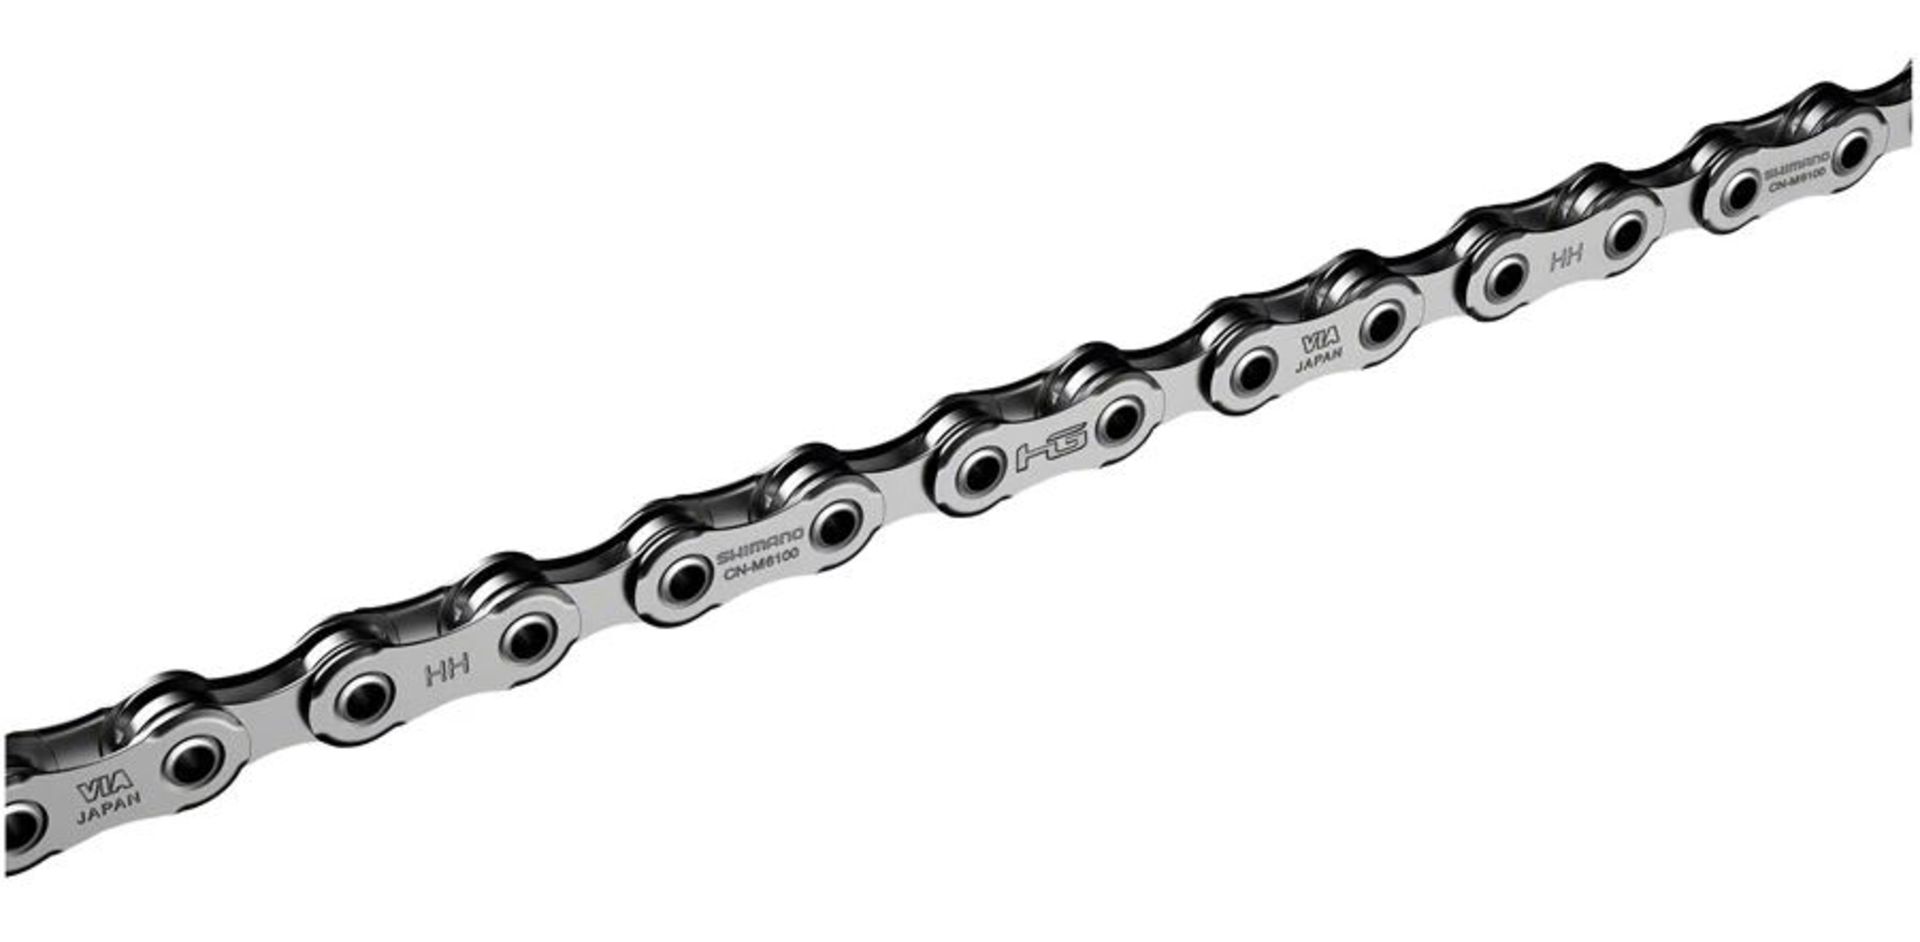 4 x shimano Deore CN-M6100 Chains - 12-Speed, 126 Links